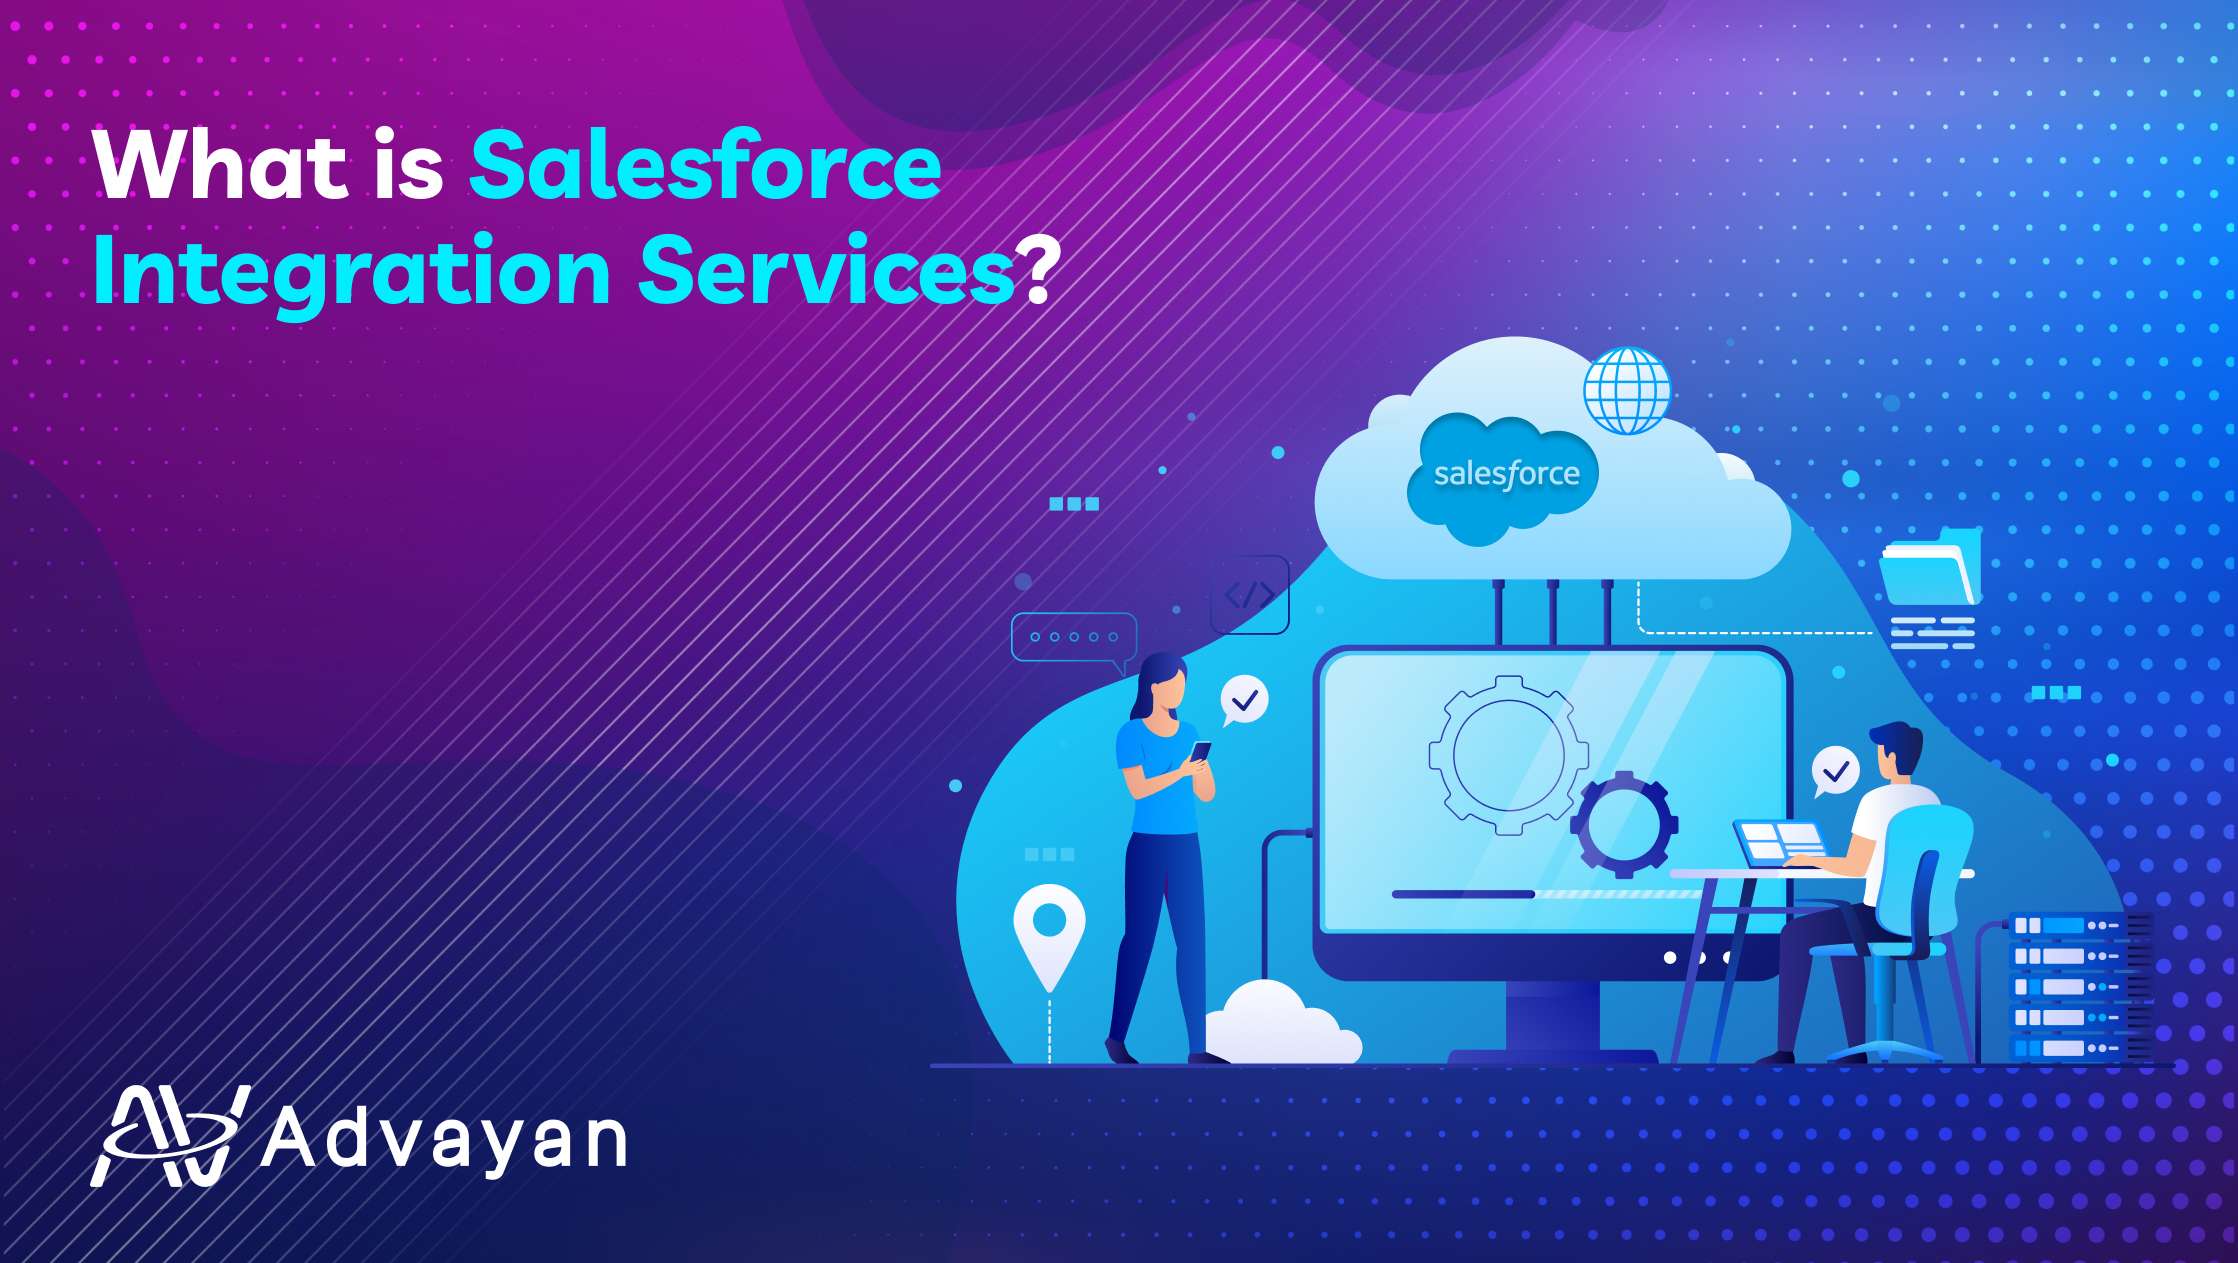 What is Salesforce Integration Services